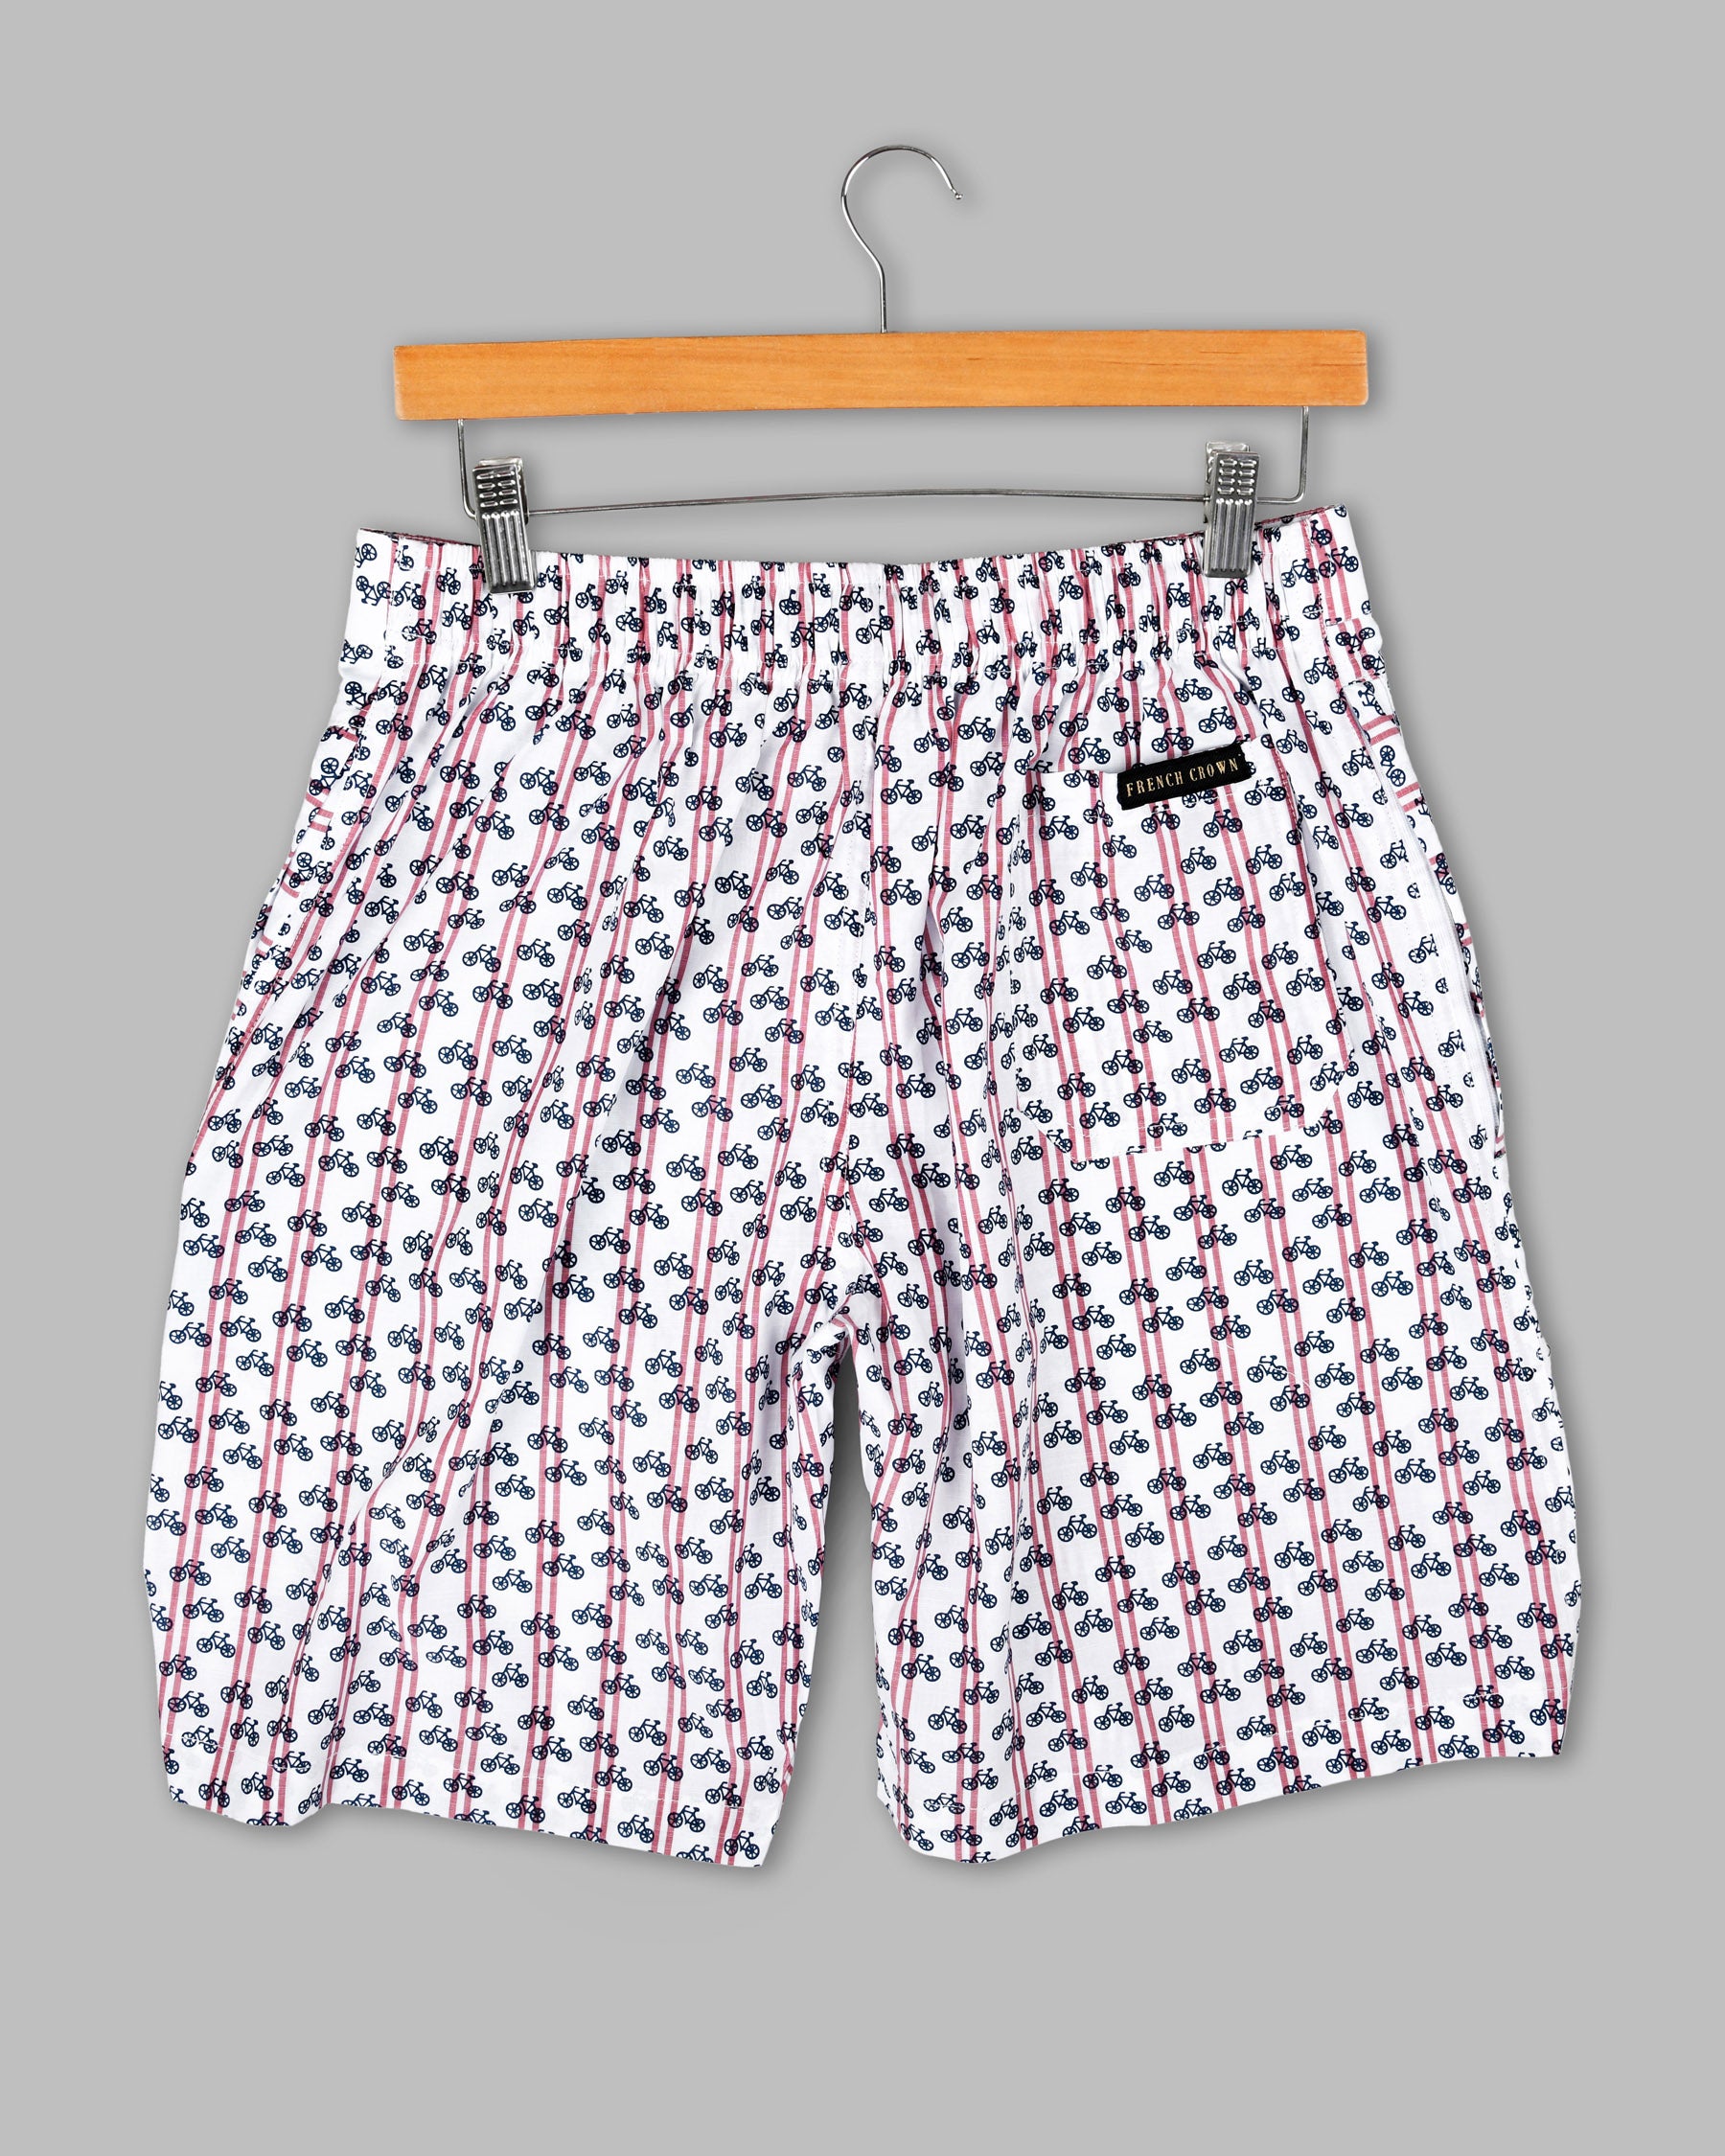 Bright White Striped and Bicycle Printed Premium Cotton Shorts SR74-28, SR74-30, SR74-32, SR74-34, SR74-36, SR74-38, SR74-40, SR74-42, SR74-44